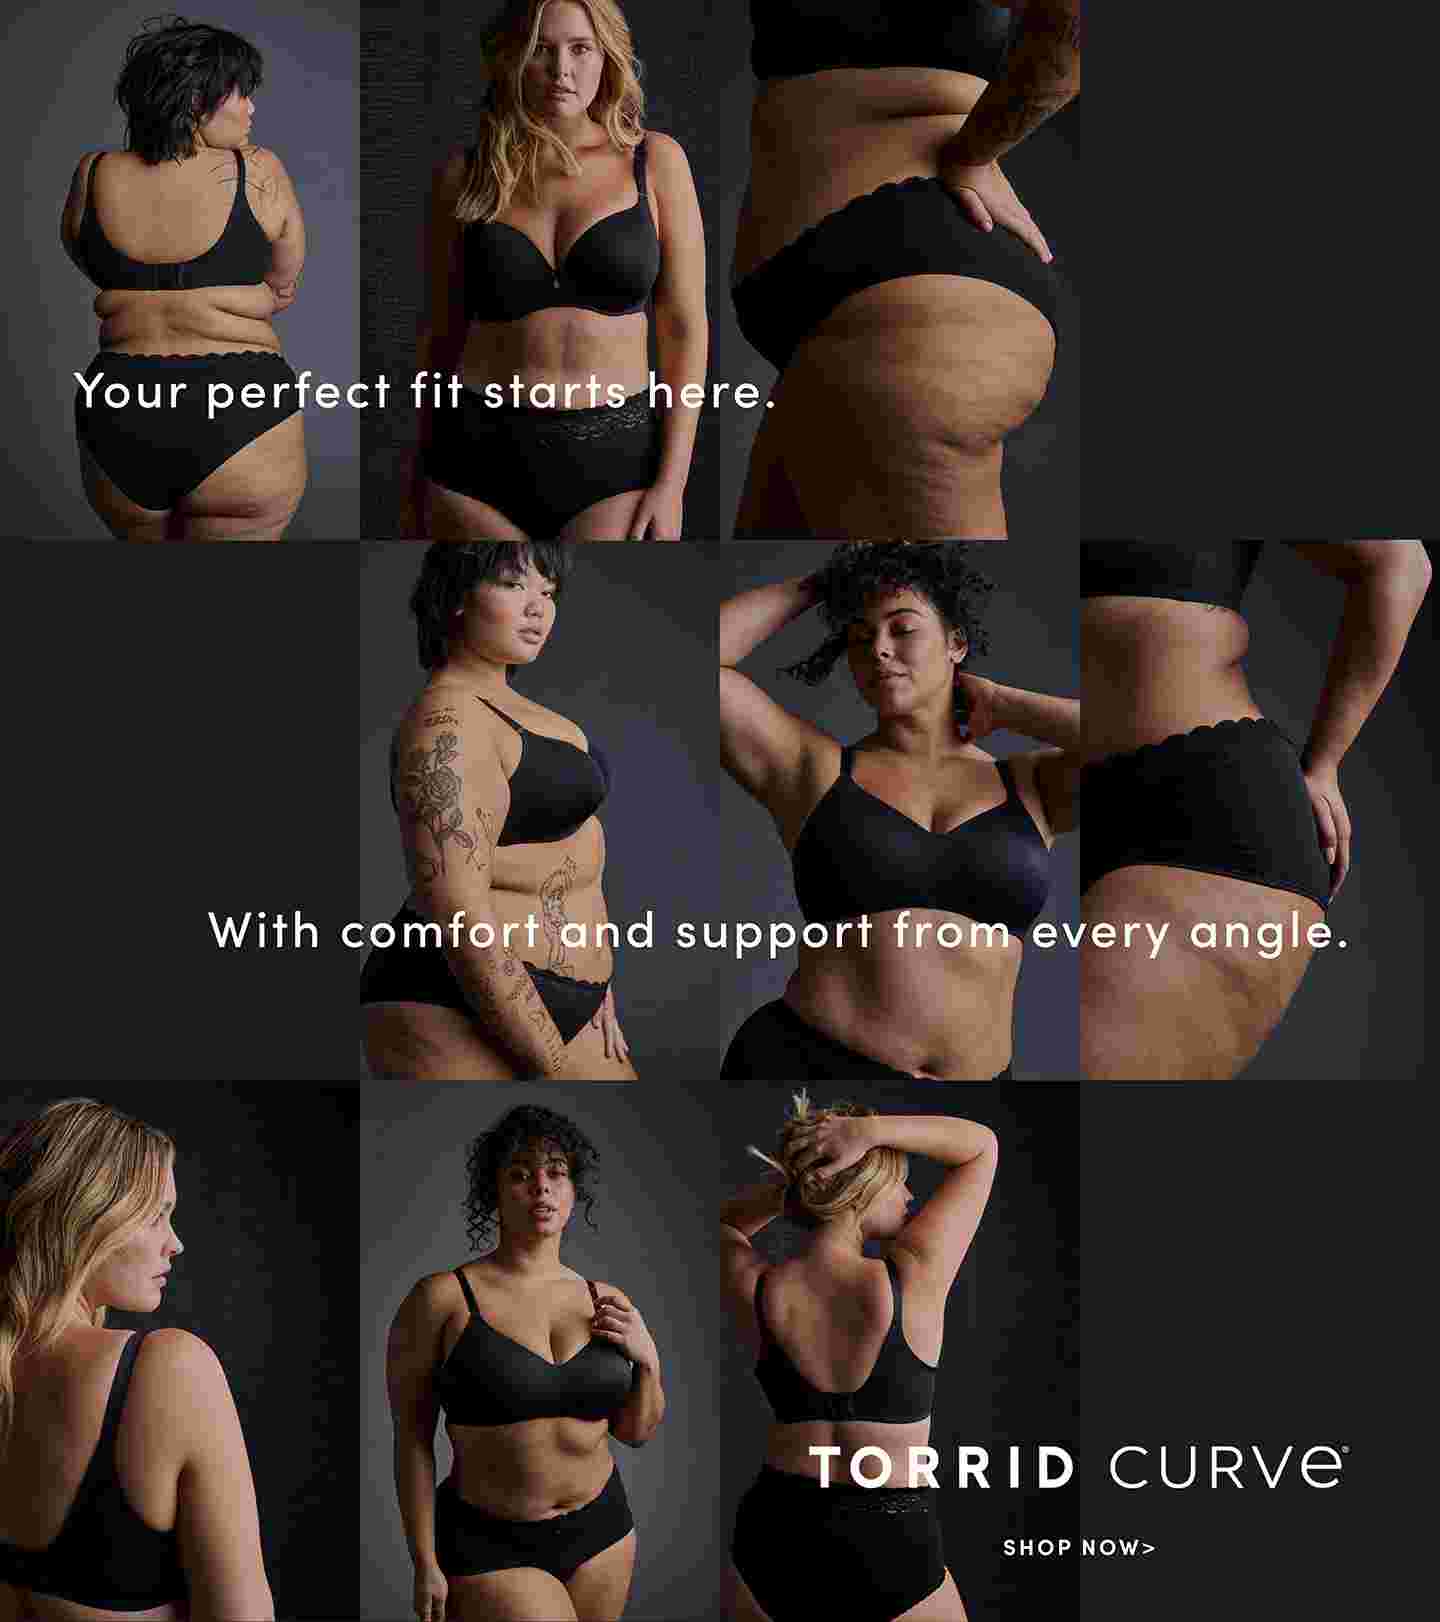 Your perfect fit starts here. With comfort and support from every angle. Torrid Curve. Shop Now.